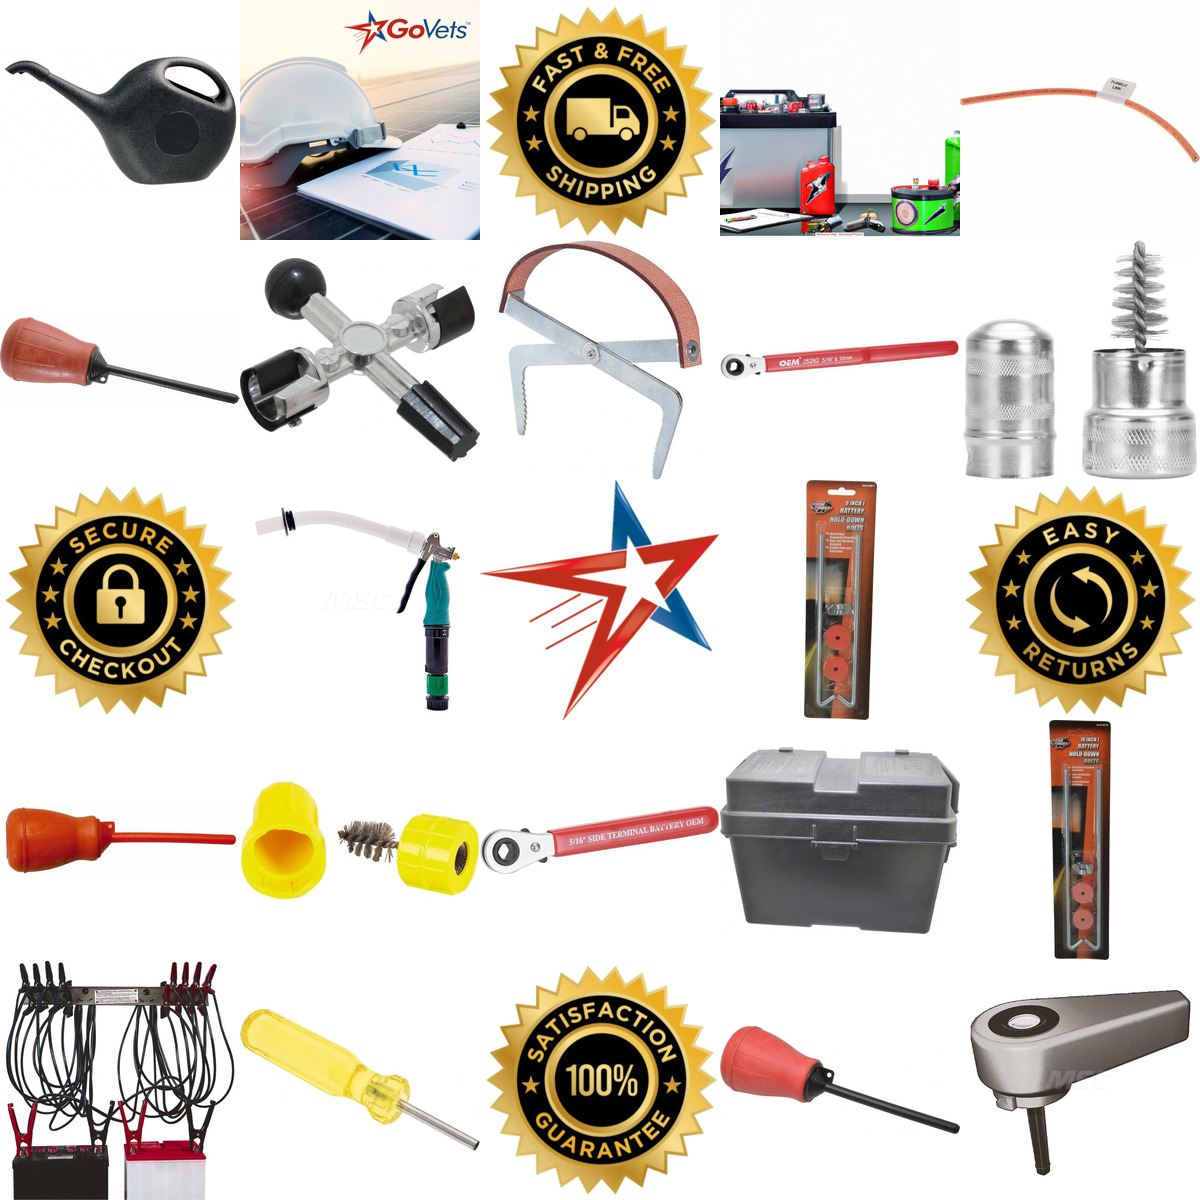 A selection of Automotive Battery Hardware and Tools products on GoVets